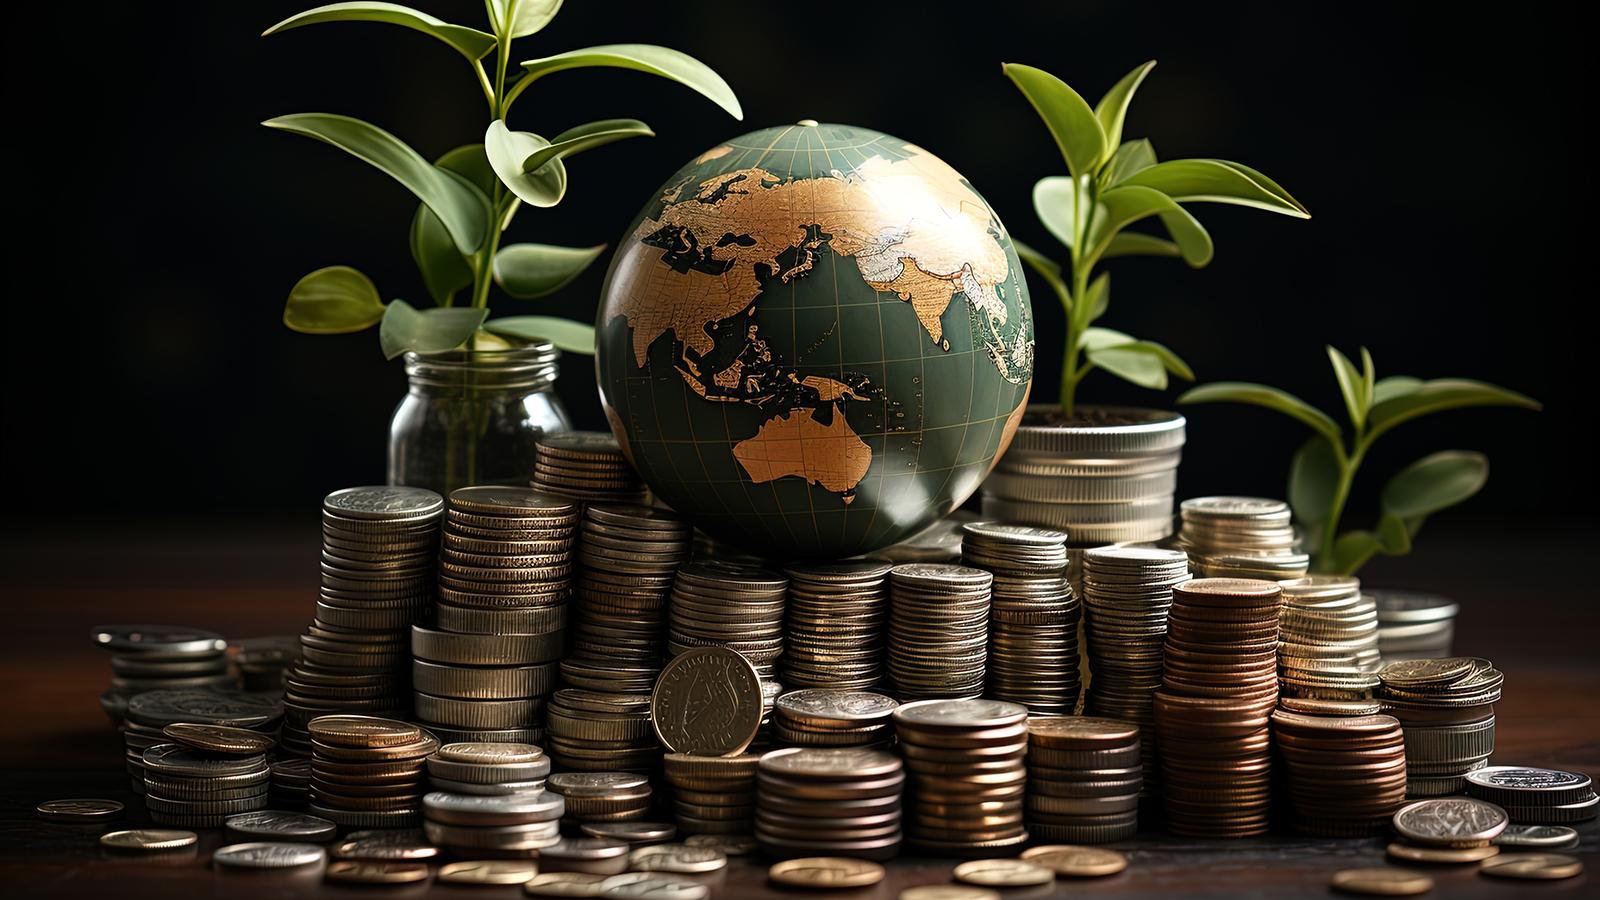 Stock photo - globe and coins